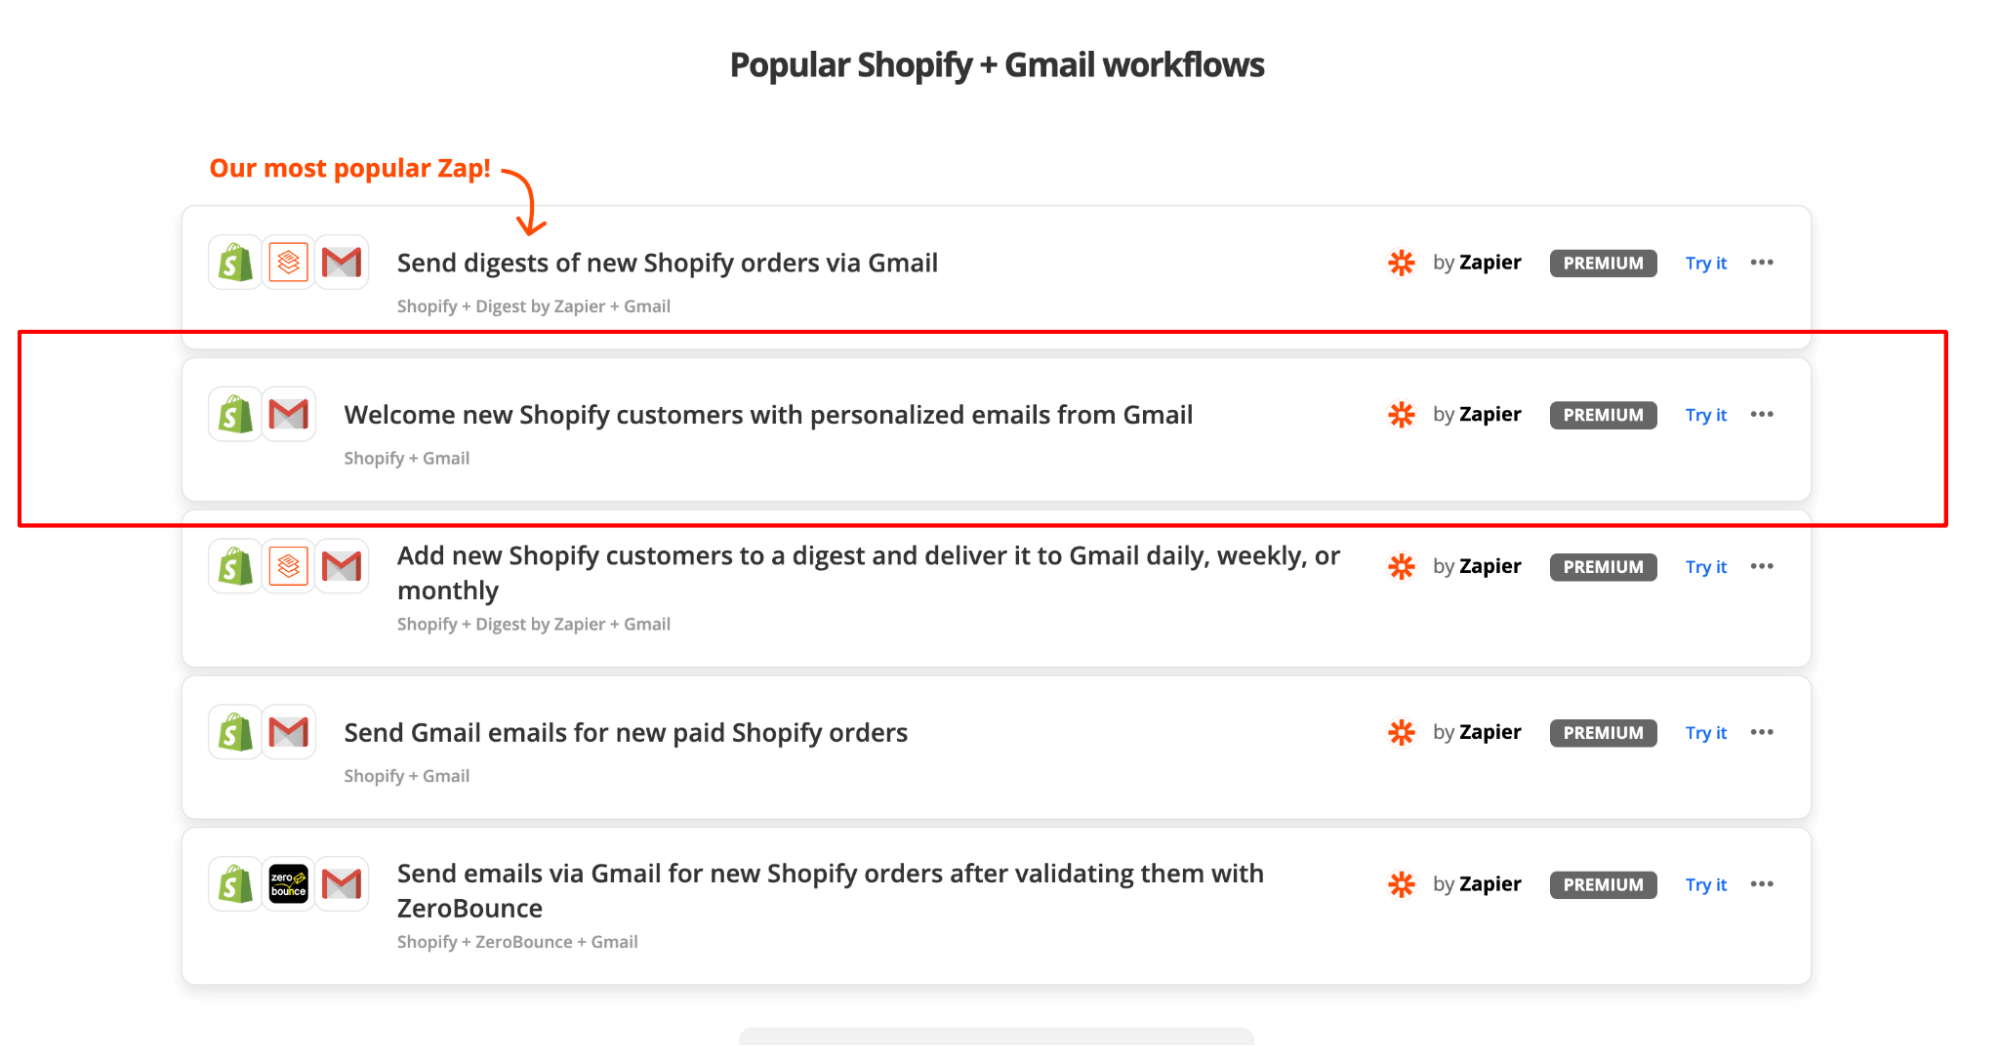 Popular Shopify and Gmail workflows